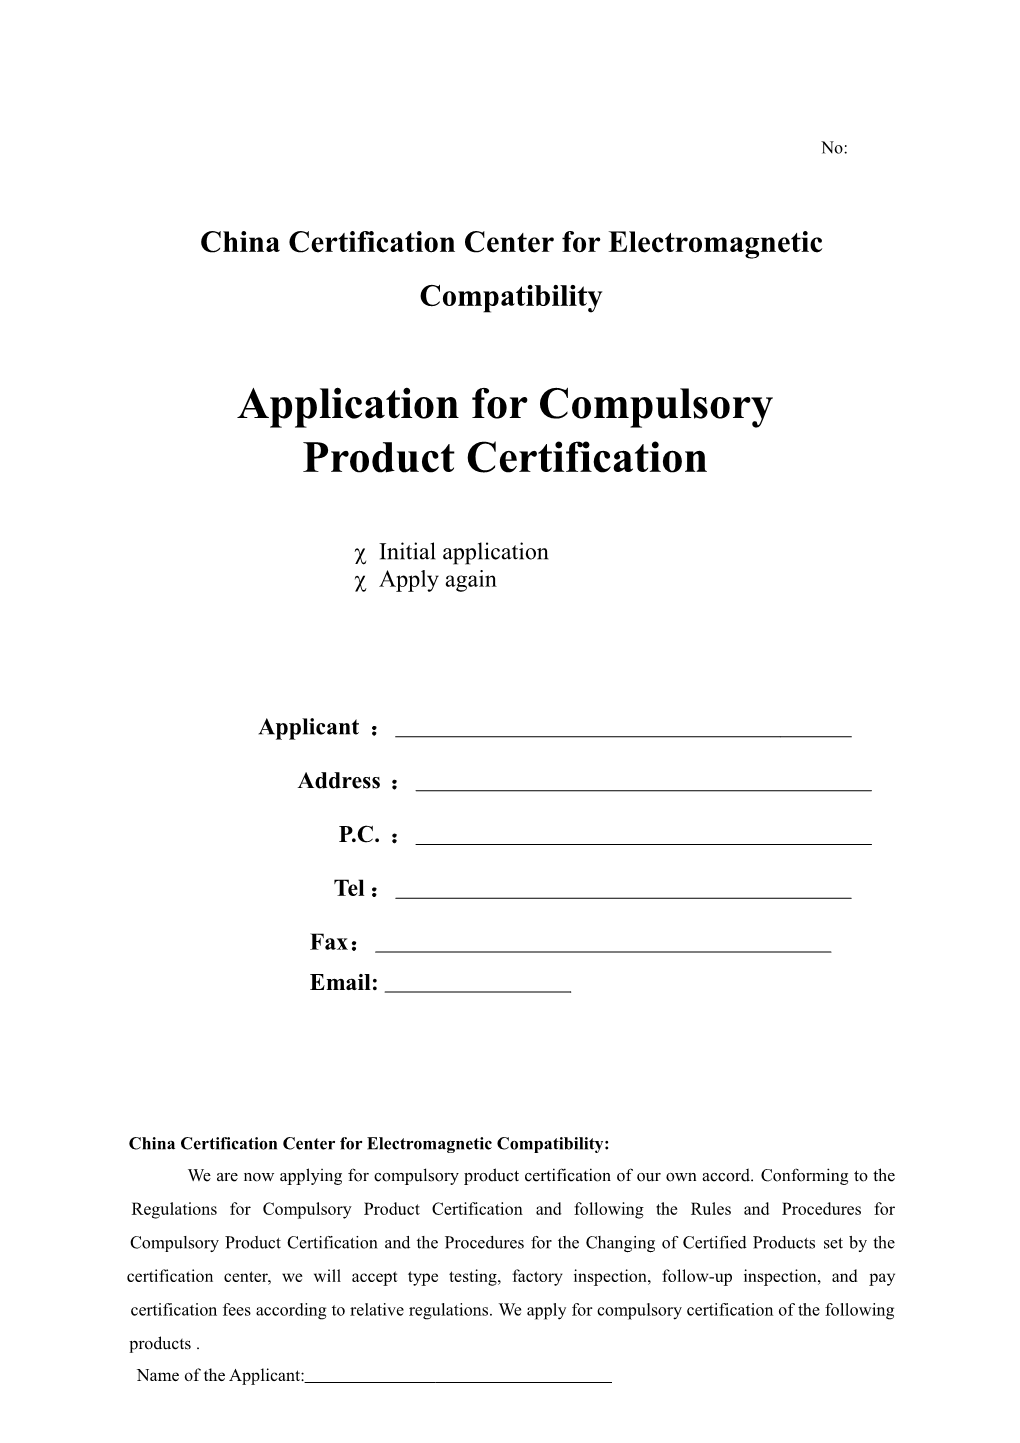 China Certification Center for Electromagnetic Compatibility